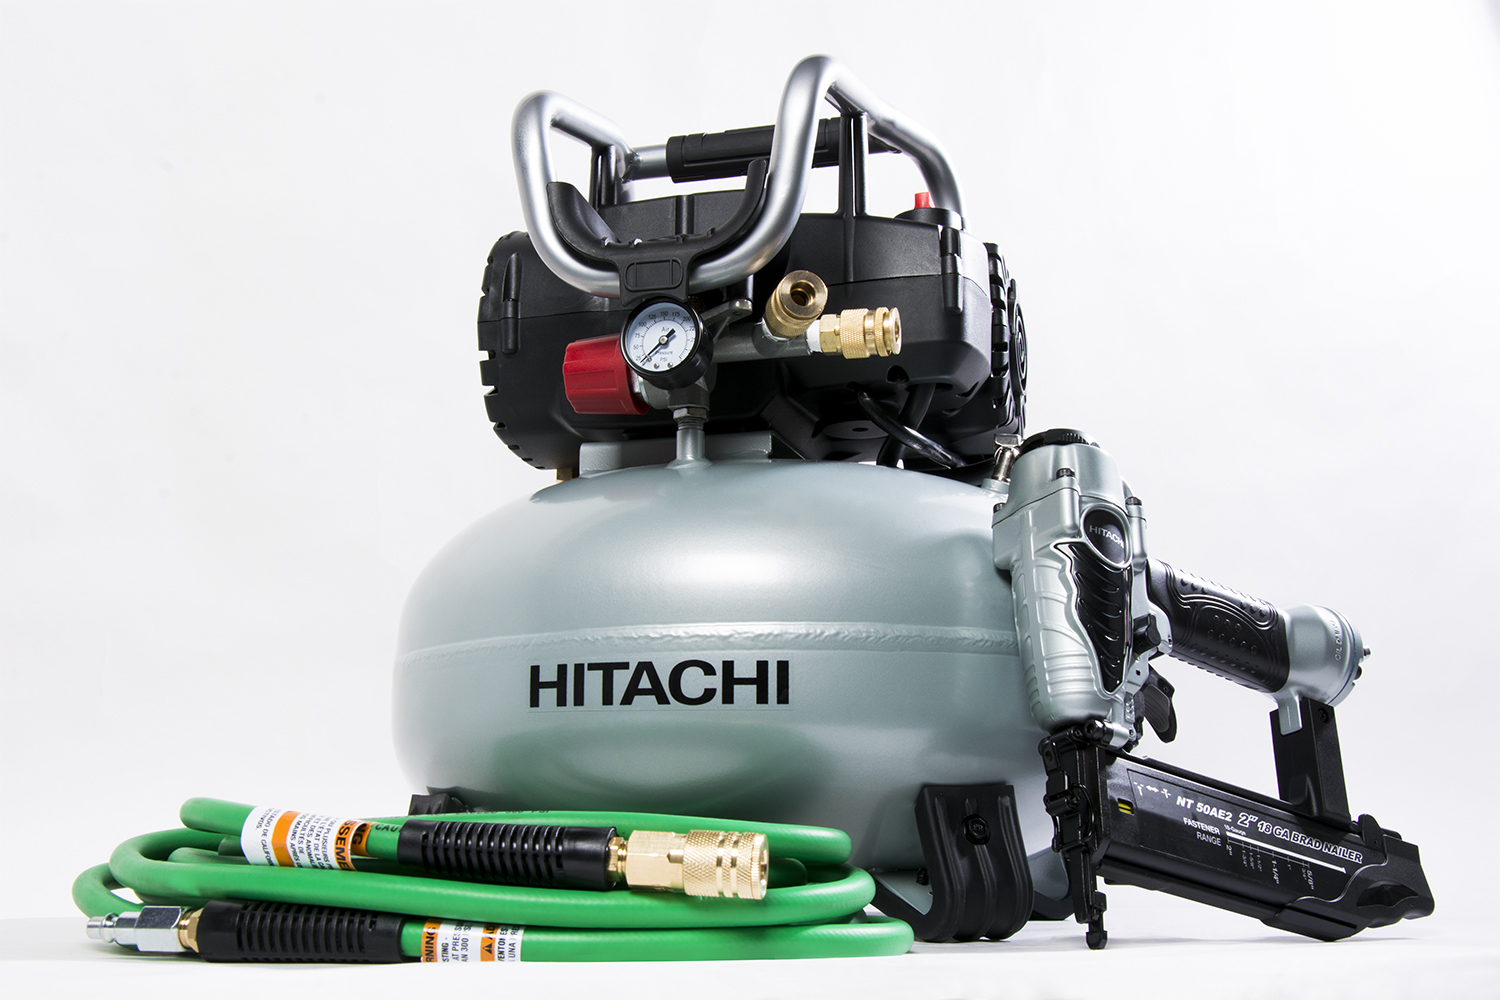 Hitachi Power Tools (Hitachi Koki USA, Ltd.) today announced the newest addition to the Finish Combo Kit market, the KNT50AB featuring a new 6-gallon 150 Max PSI Pancake Air Compressor (model EC710S) and Hitachis dependable and popular off-the-shelf 18-Gauge 2 Brad Nailer (model NT50AE2) along with a 25 hybrid hose, safety glasses and pneumatic oil.